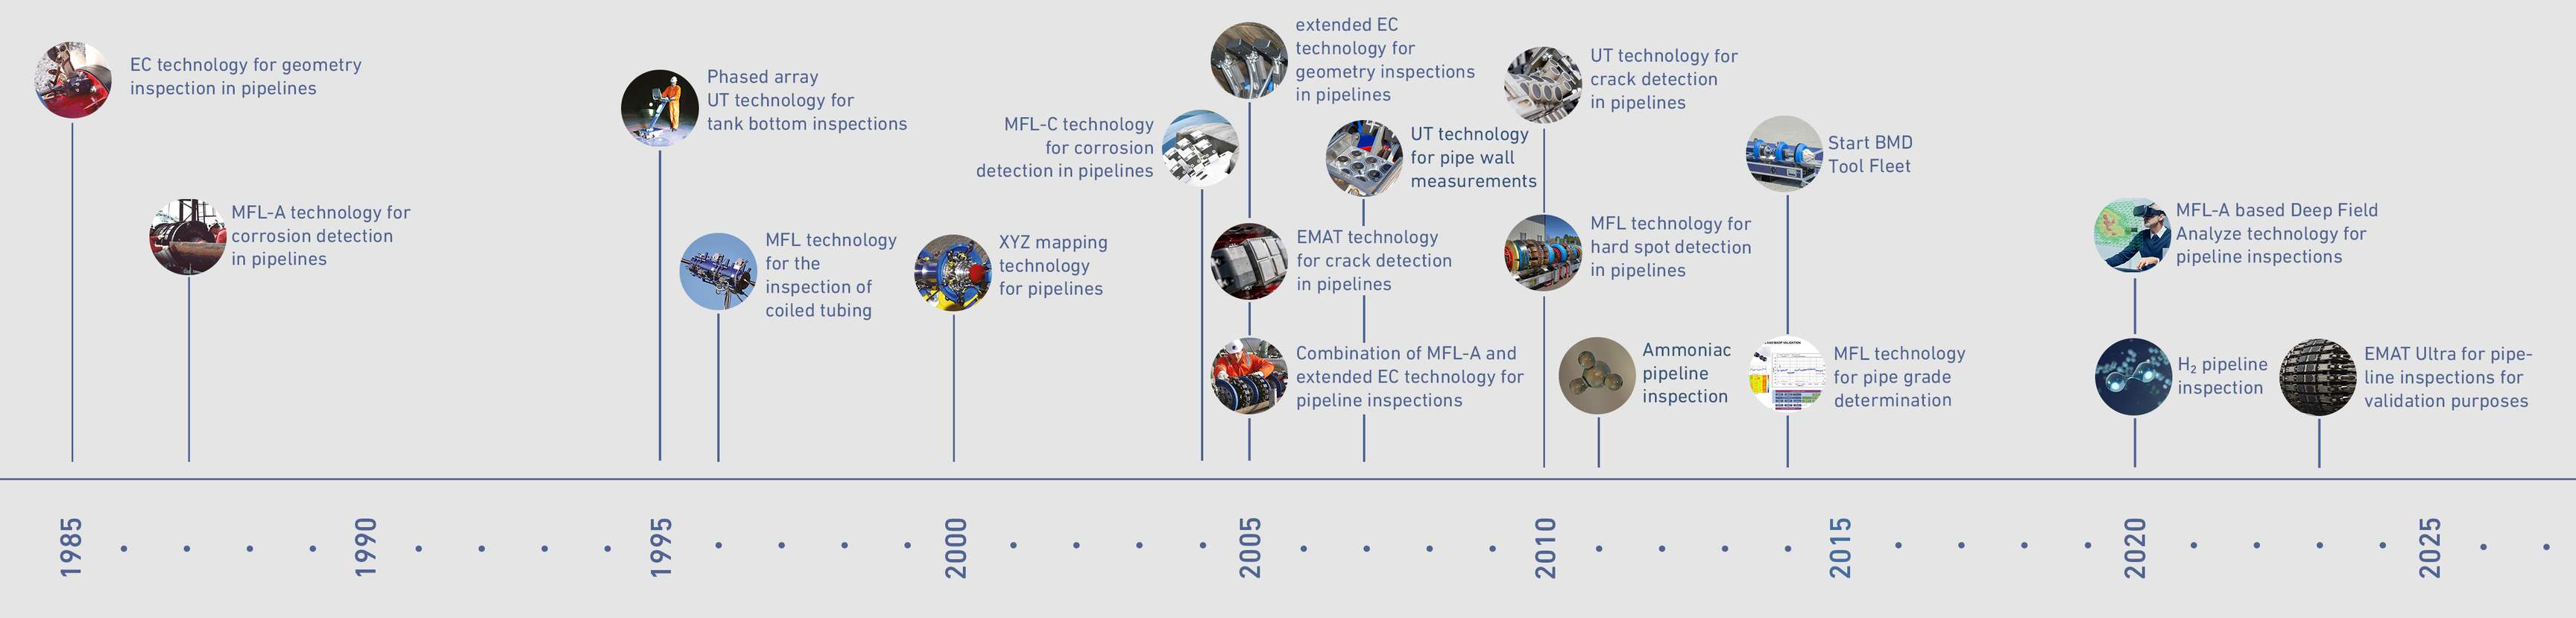 The timeline of ROSEN's sensor technologies and their applications